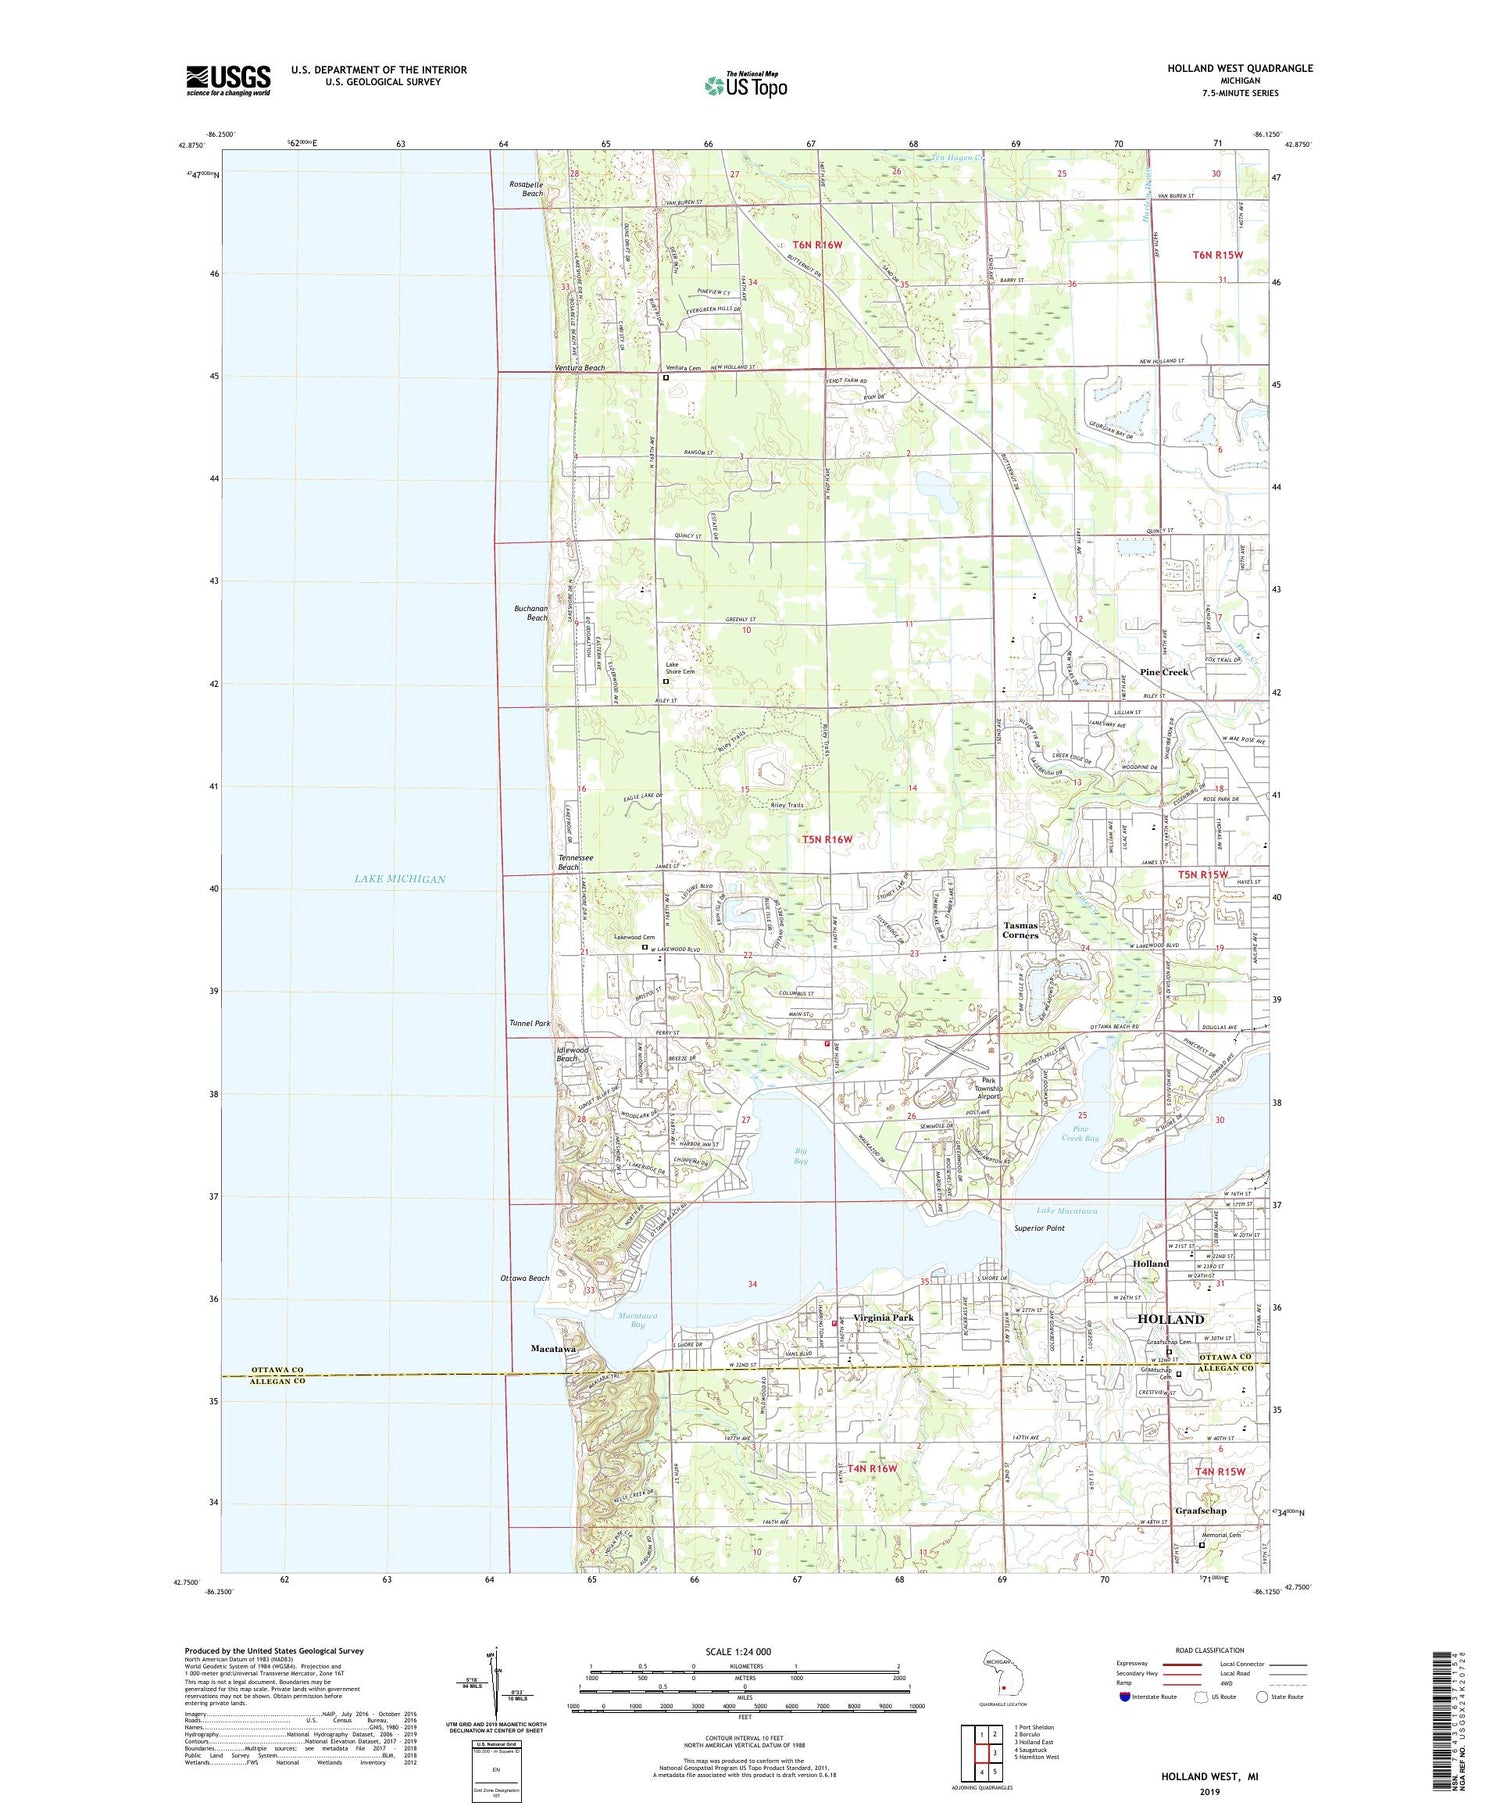 Holland West Michigan US Topo Map Image